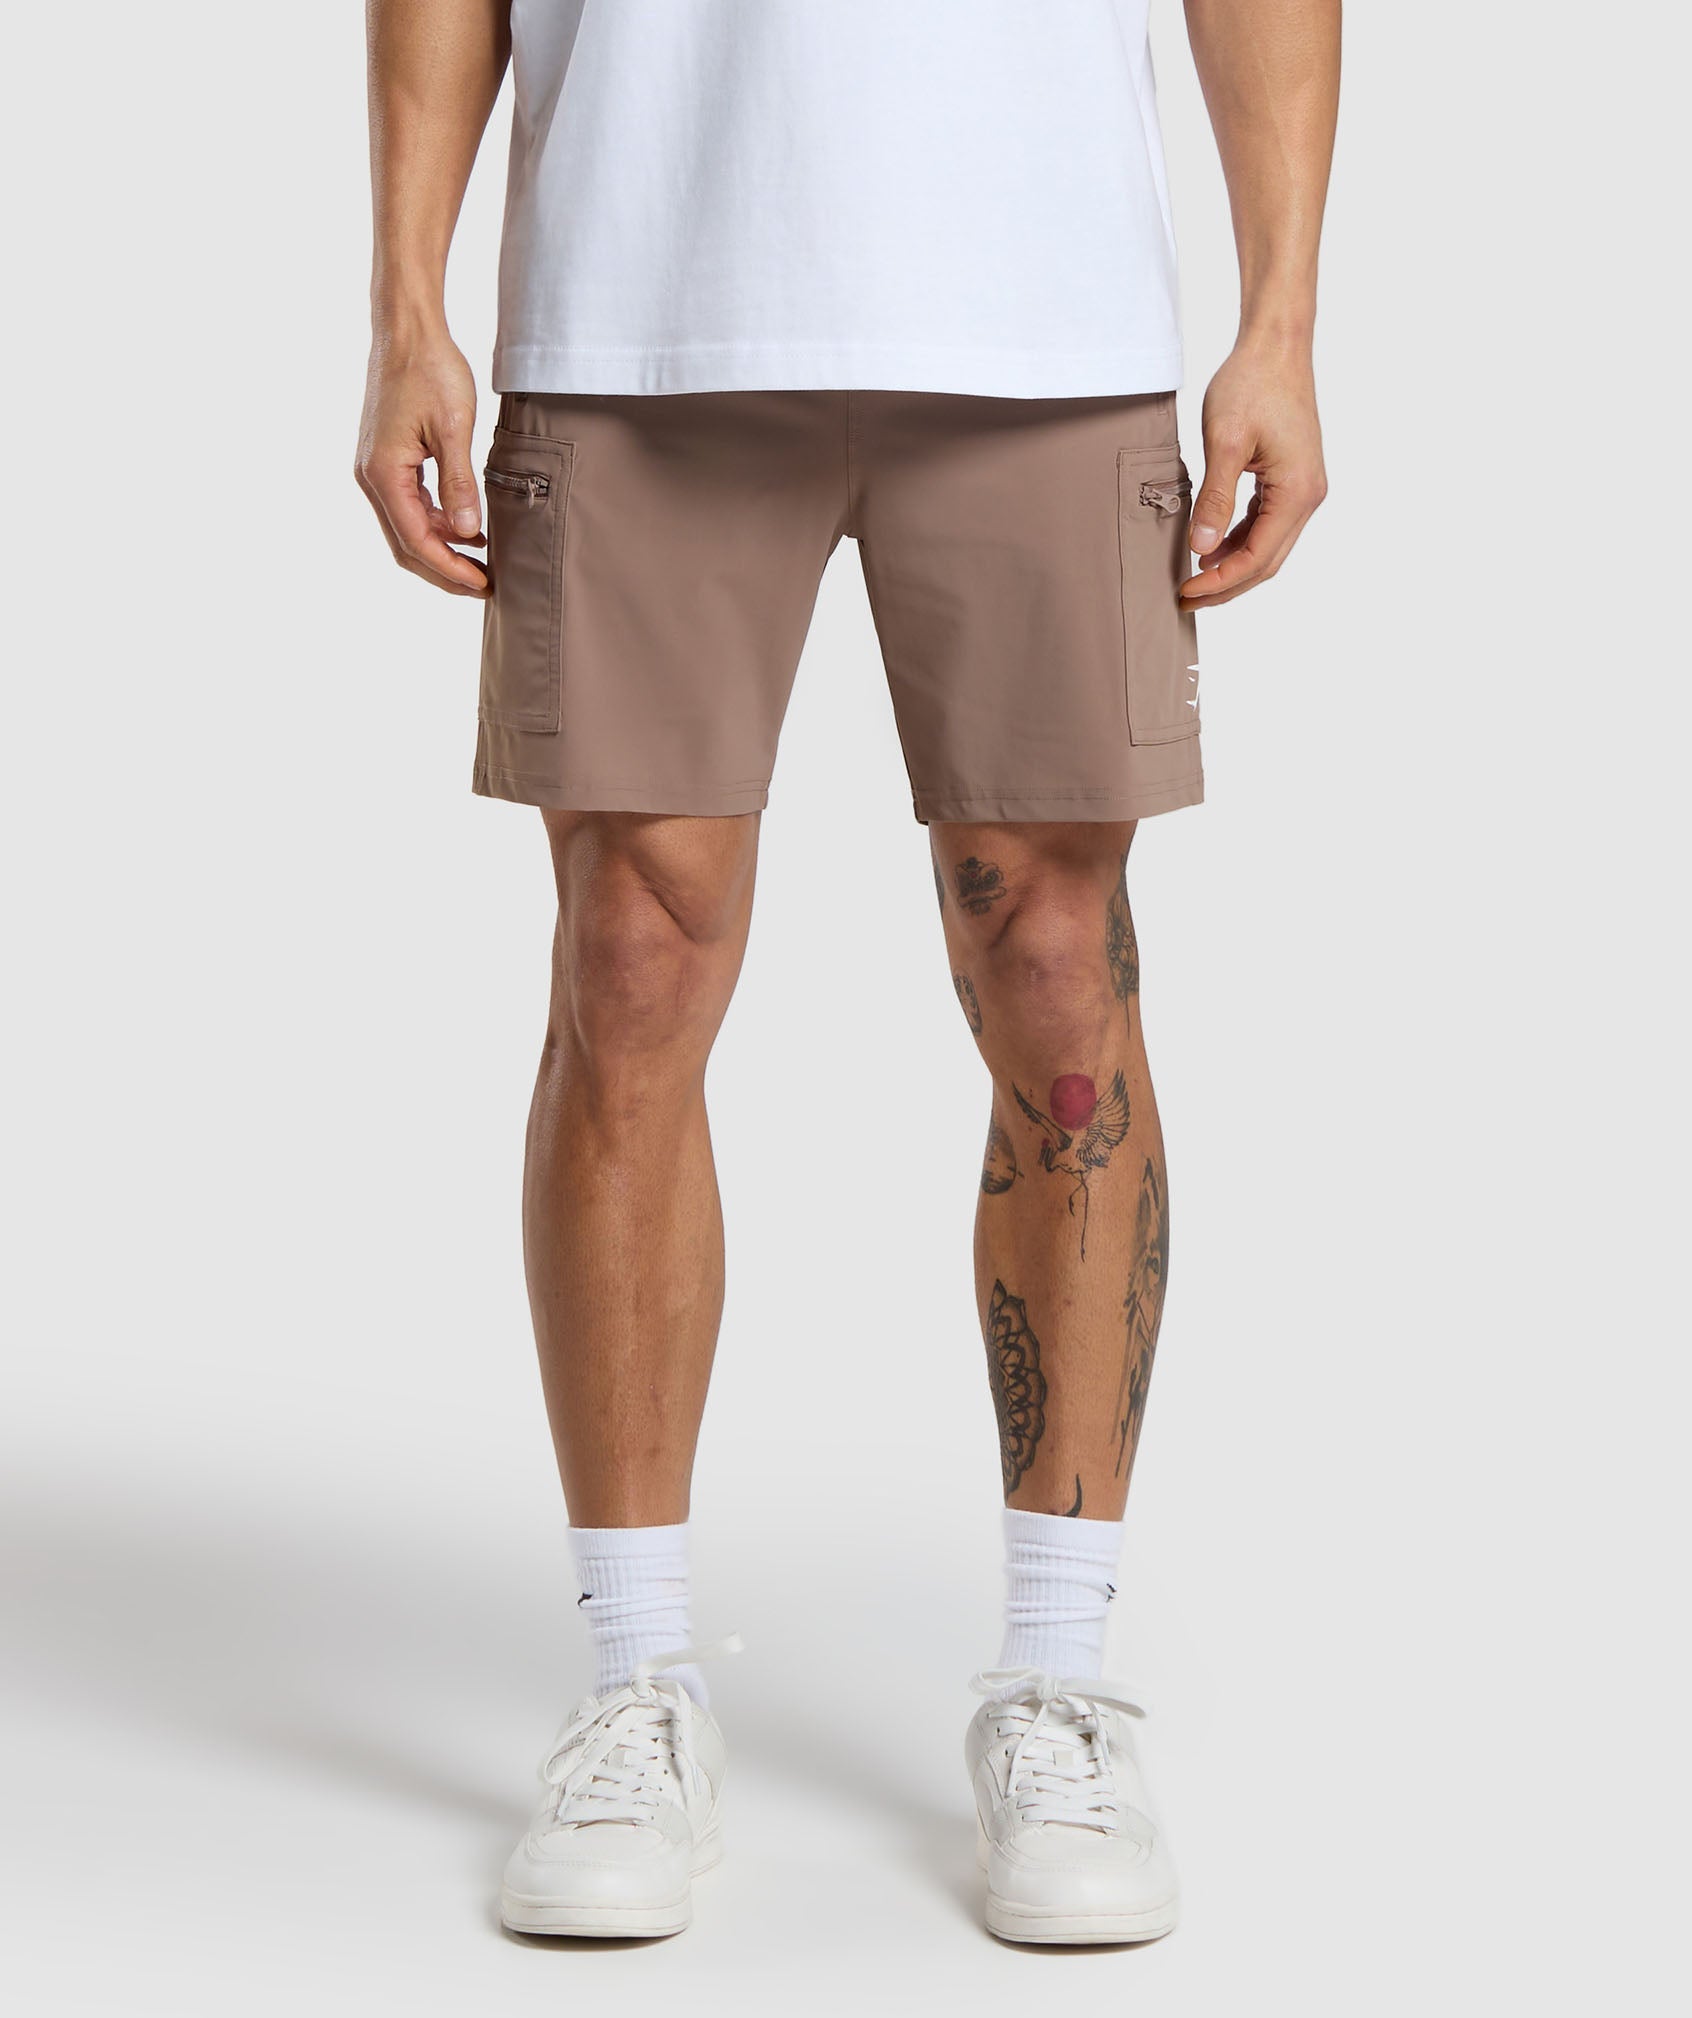 Rest Day 6" Cargo Shorts in Mocha Mauve - view 5